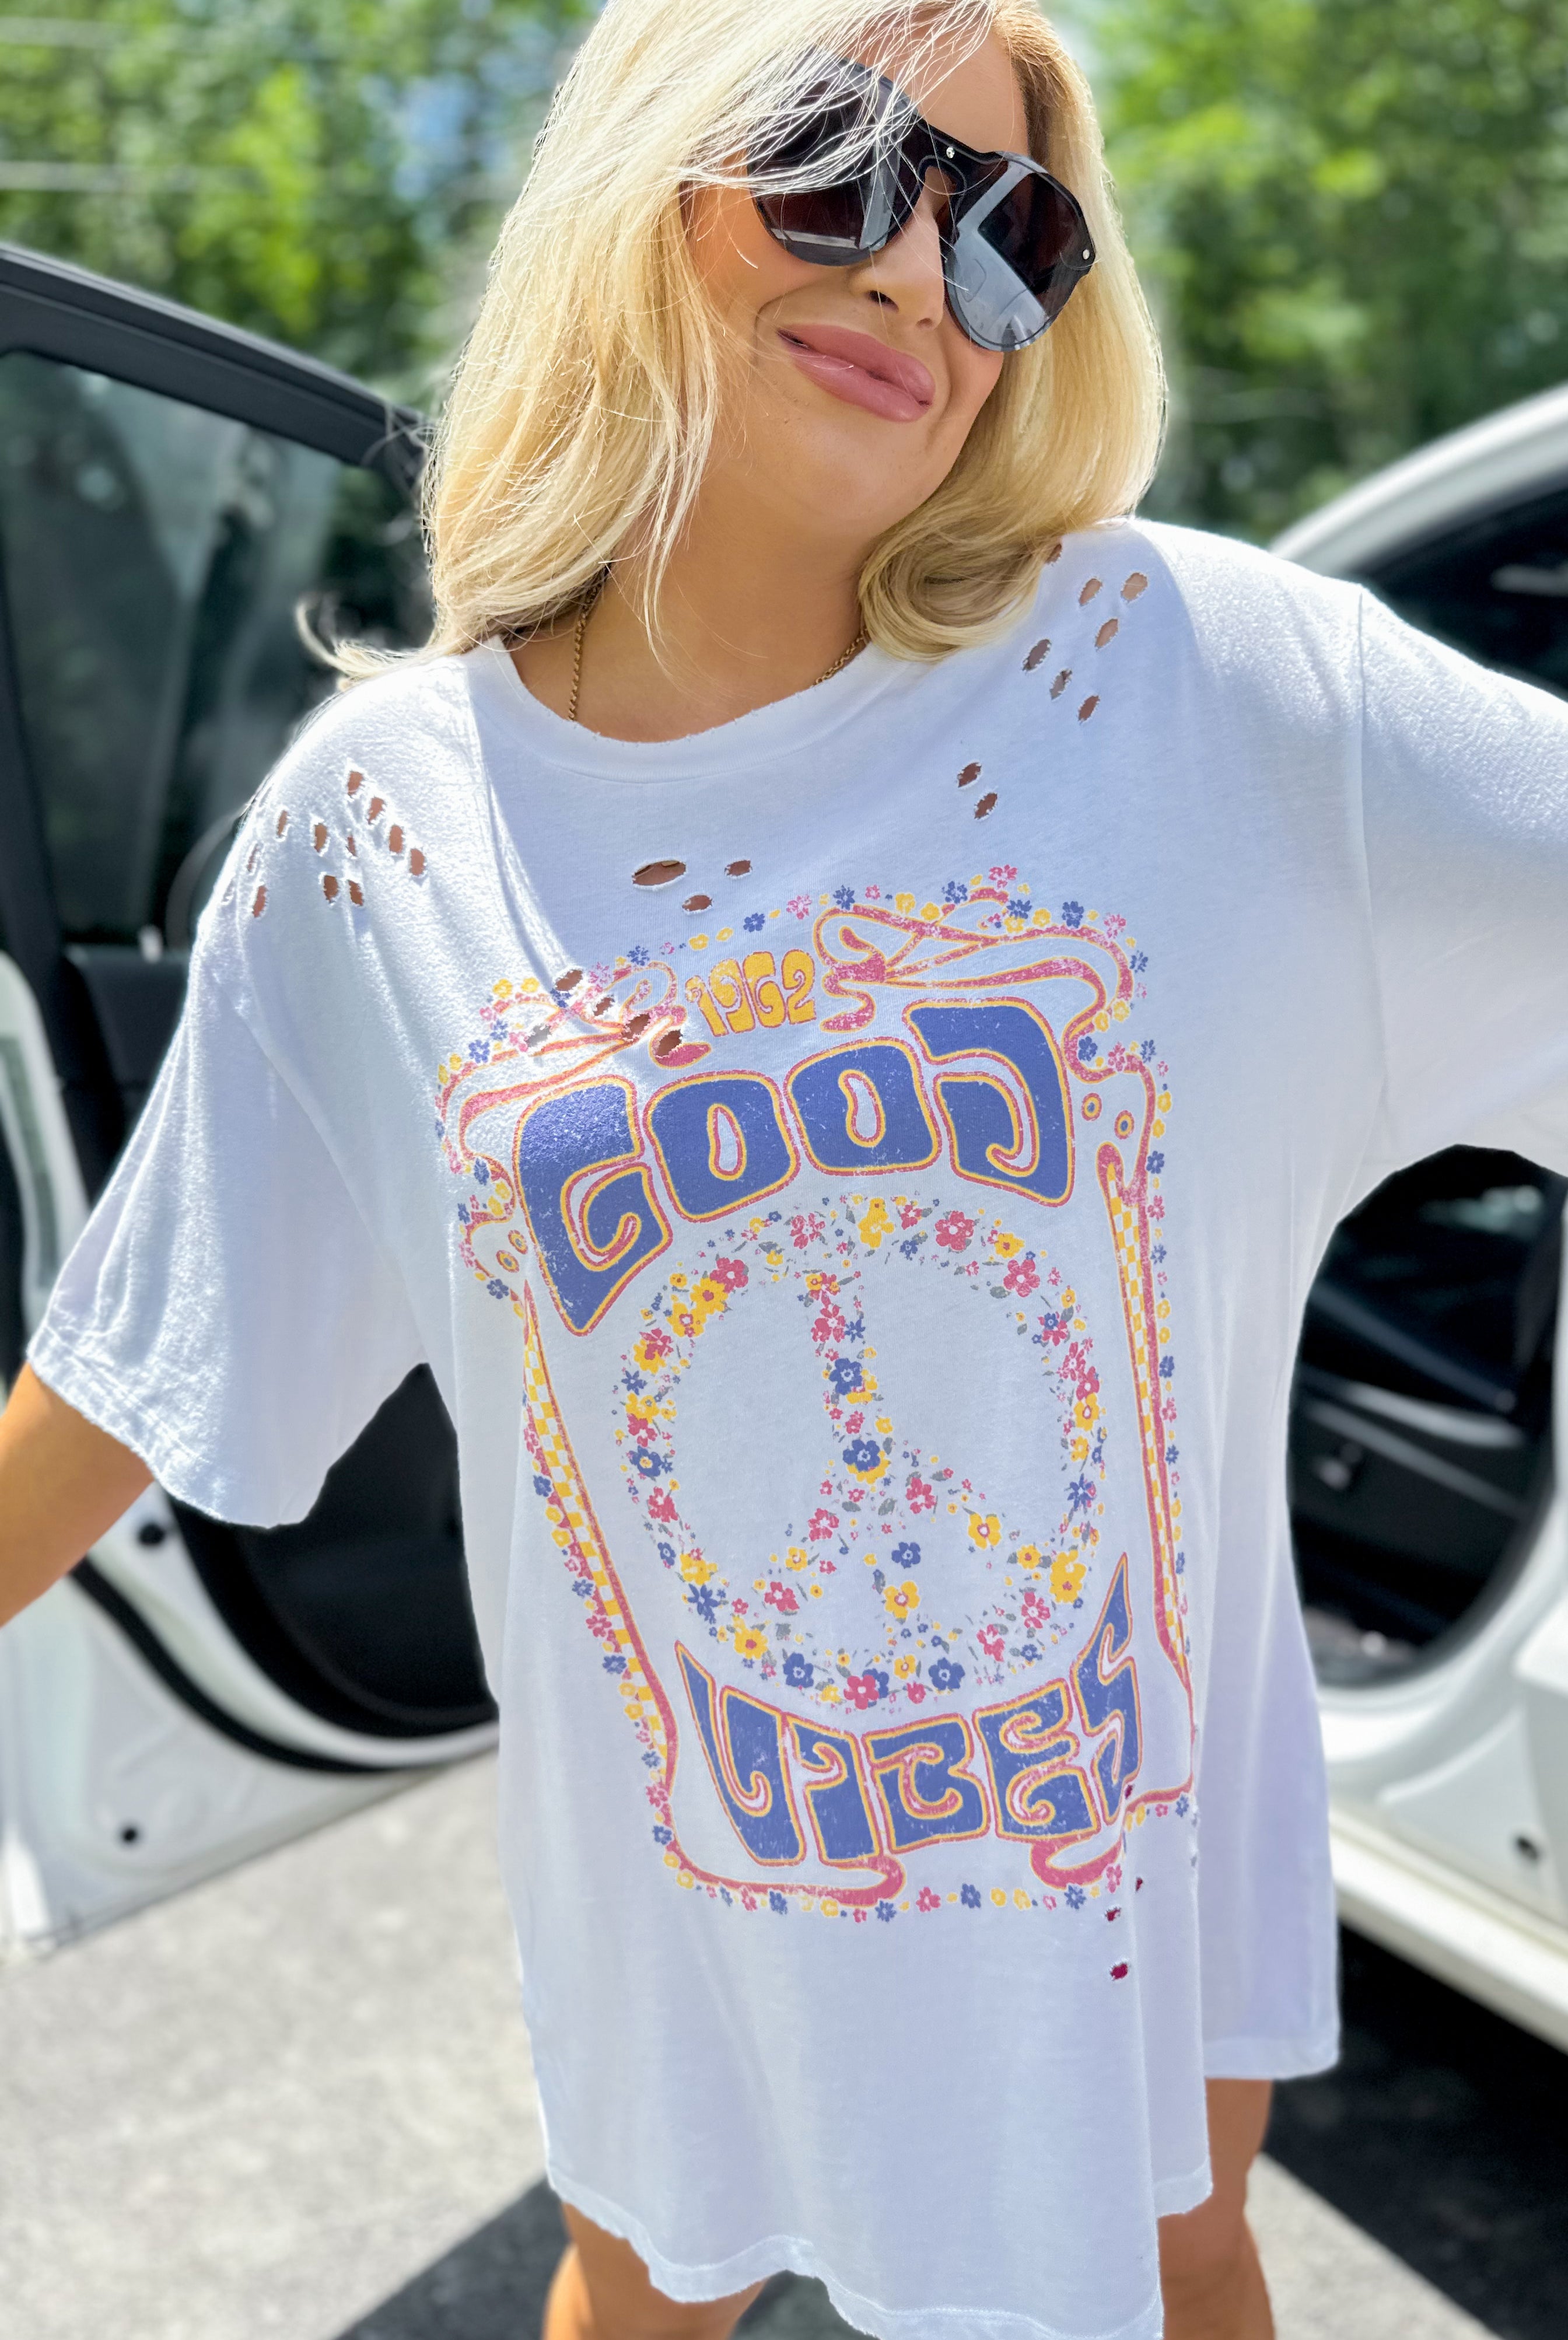 Good Vibes Floral Peace Oversized Short Sleeve Graphic Tee - Be You Boutique